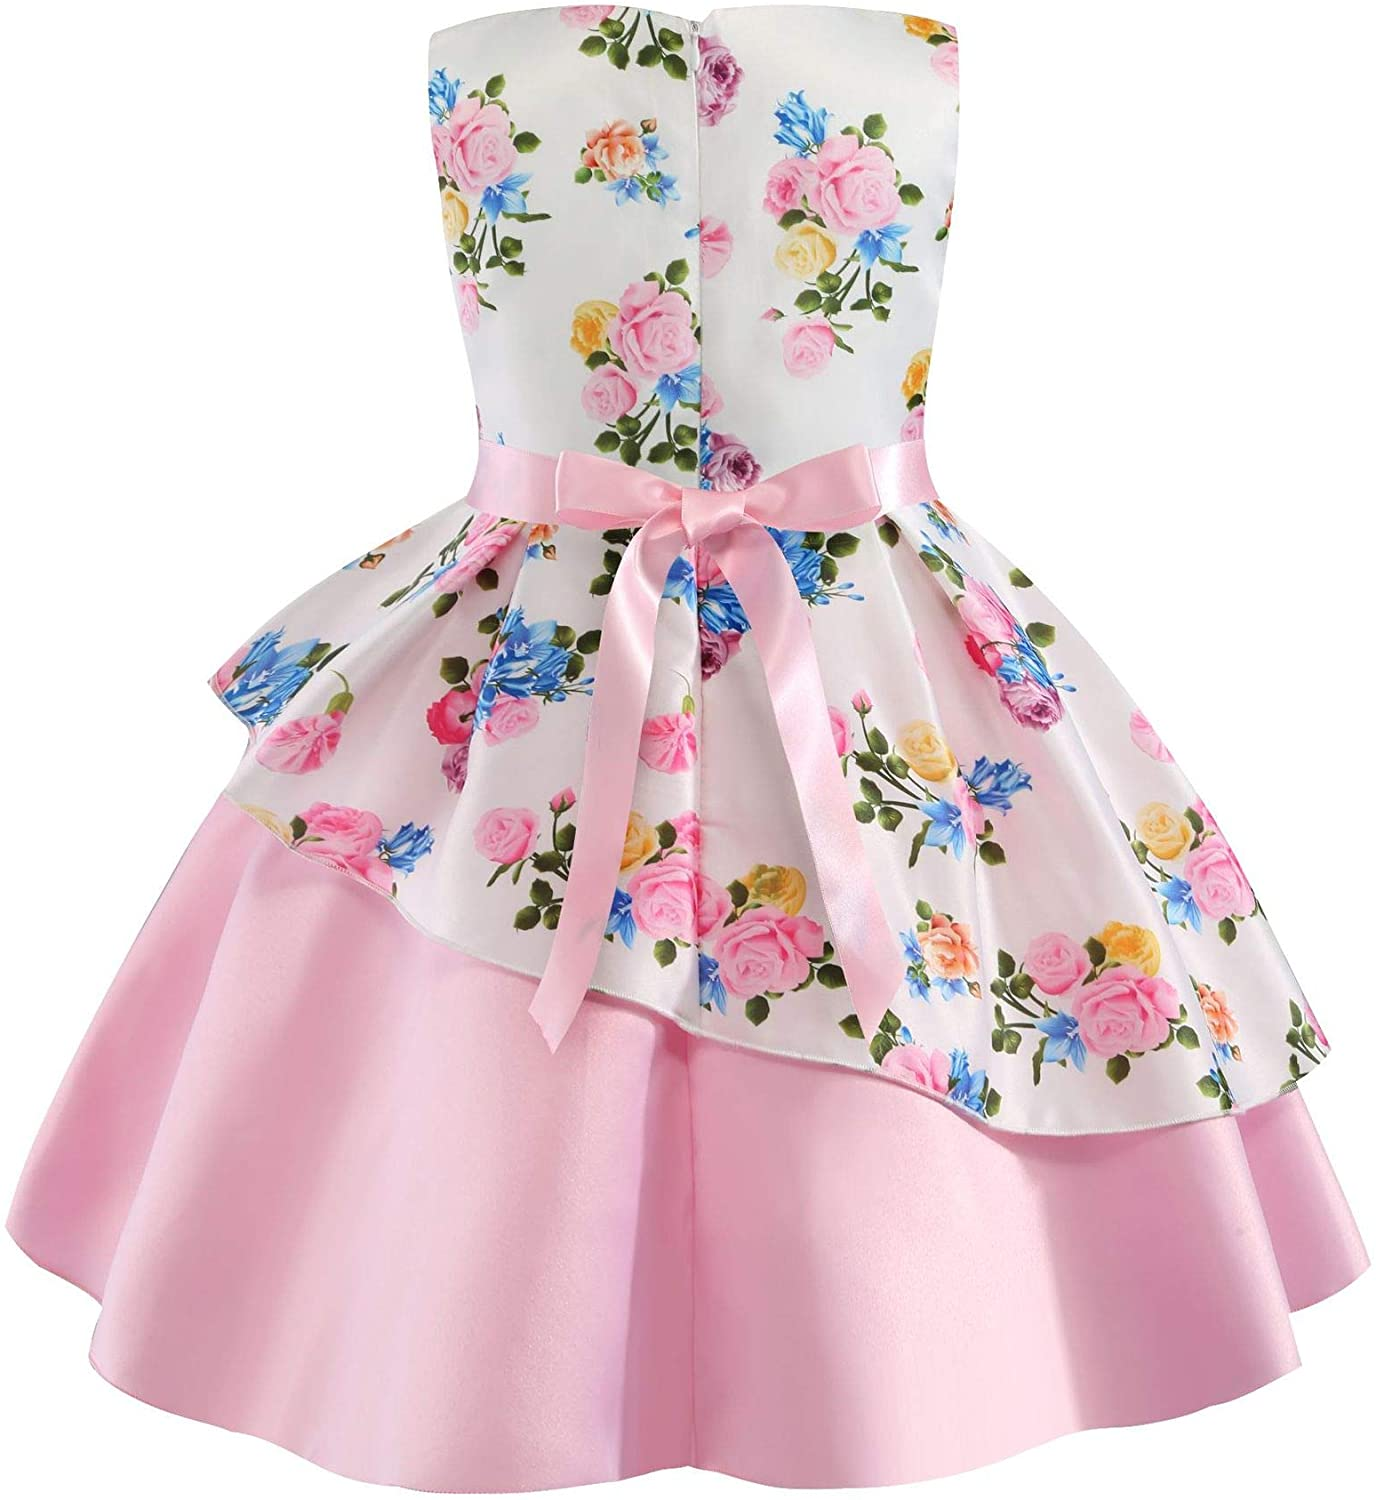  "Fancy Flower Dresses for Girls: Perfect for Special Occasions and Parties"